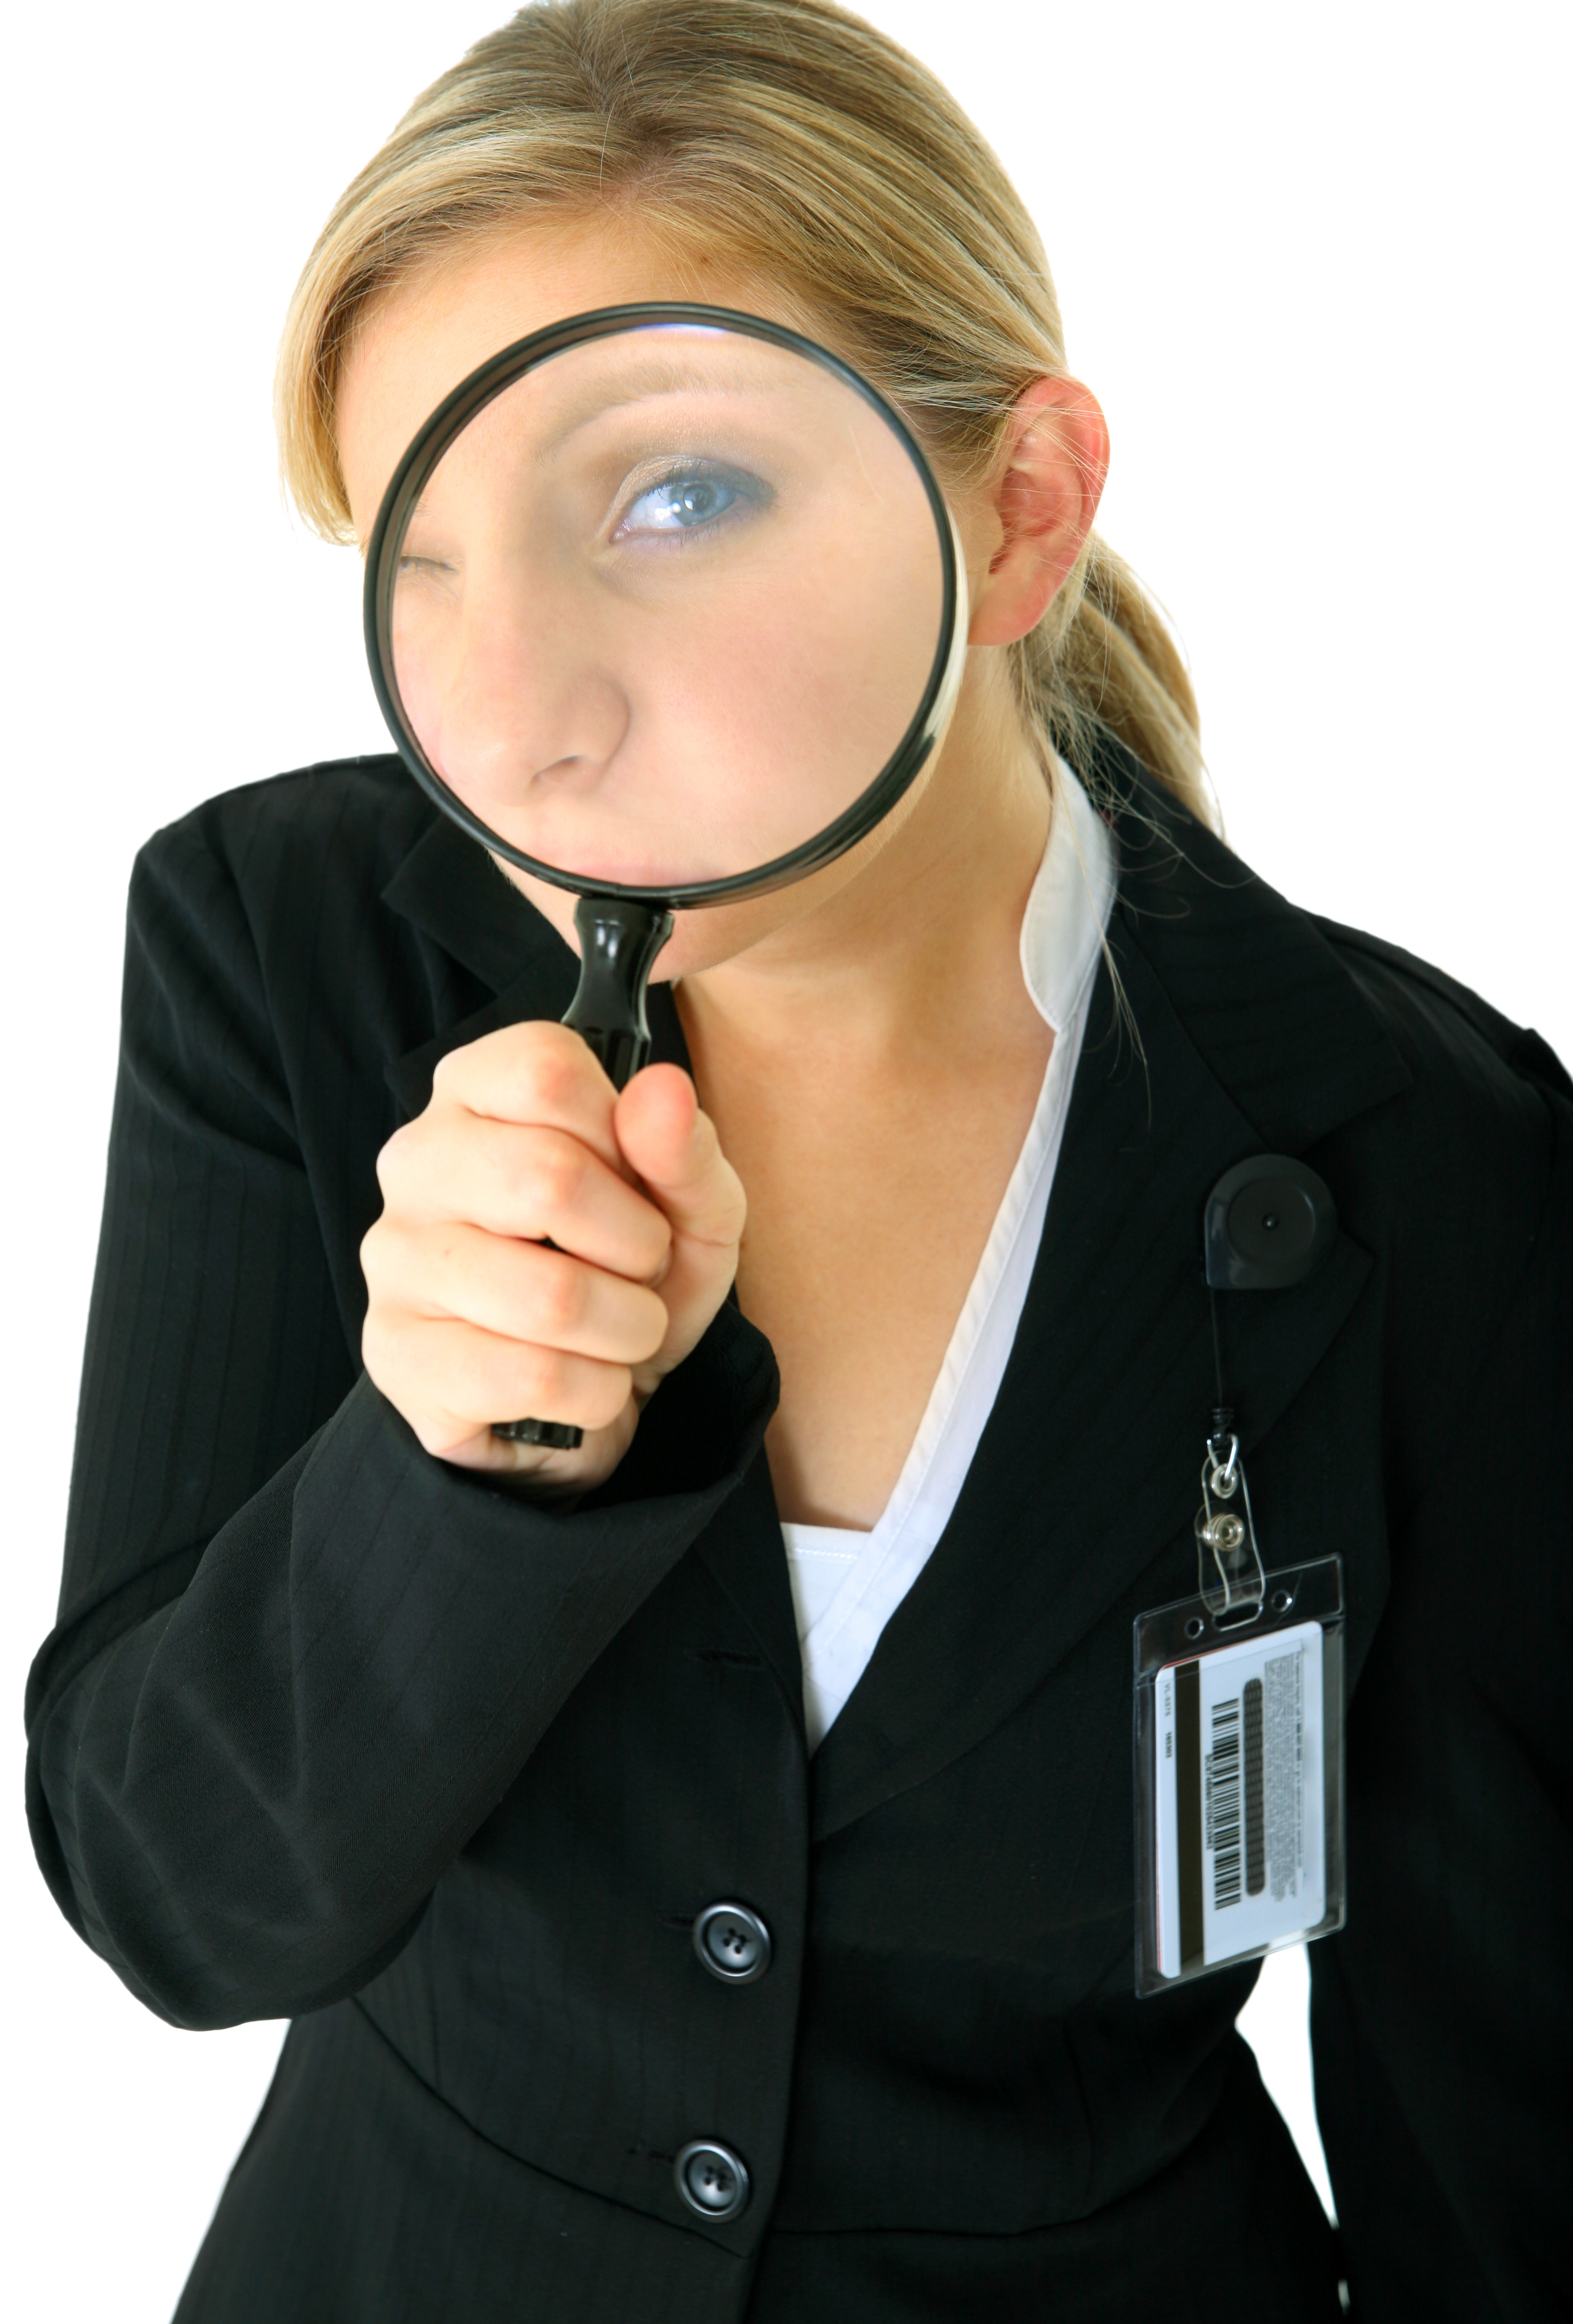 shutterstock_29040337 - business woman looking magnifying glass